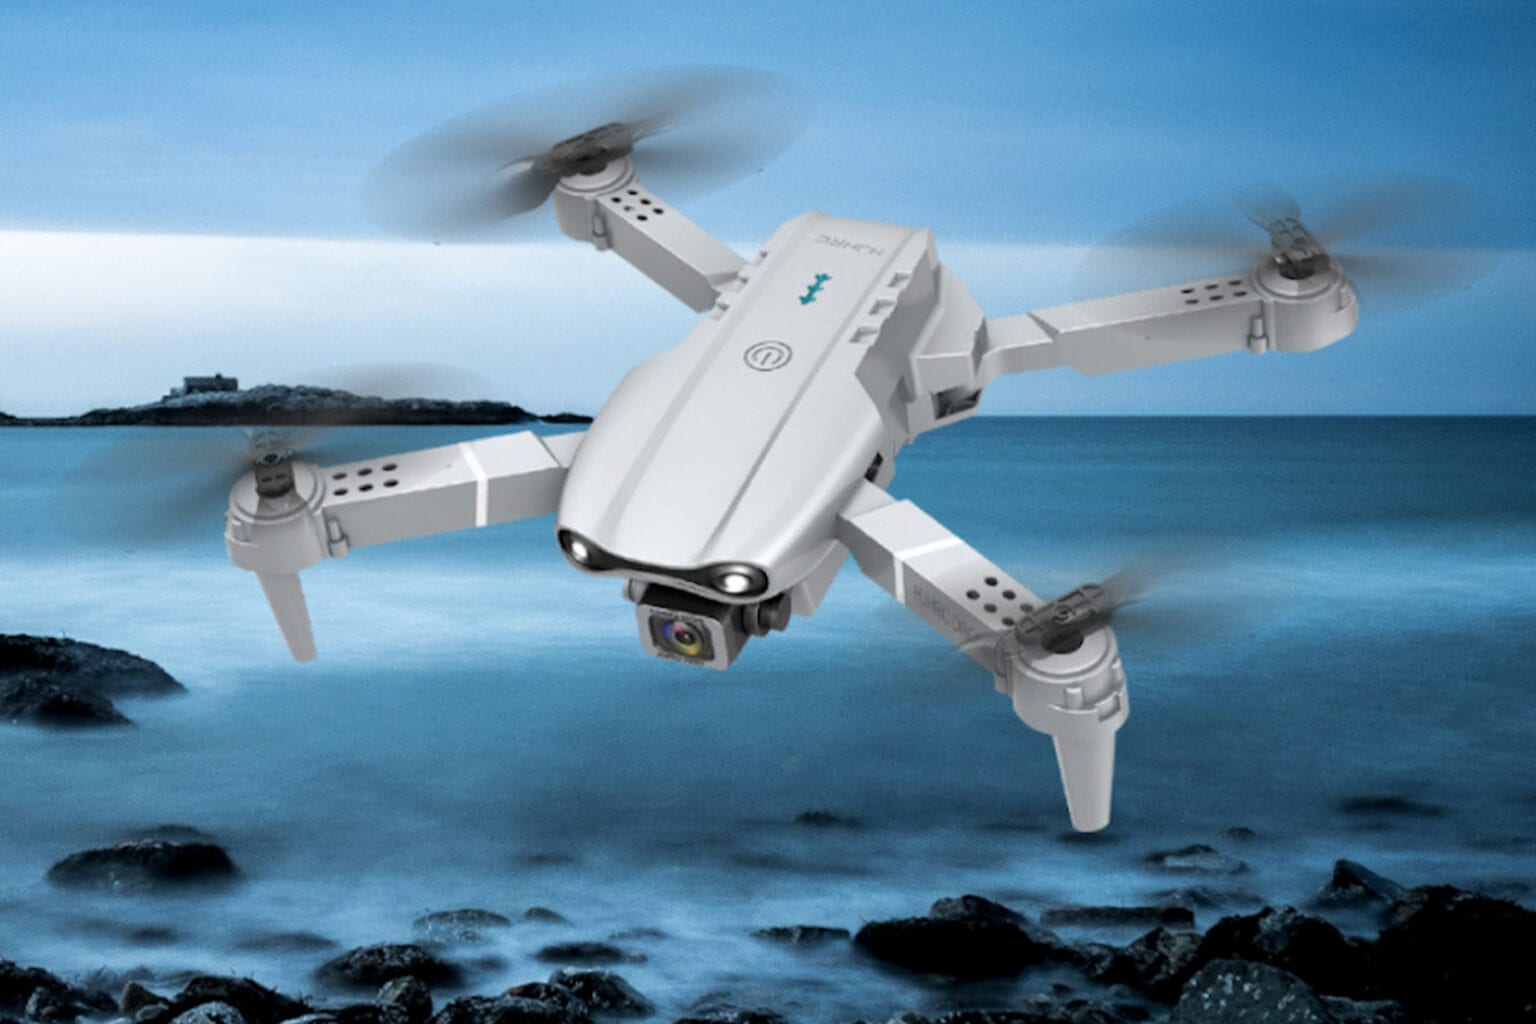 These discounted drones provide impressive range and clear visuals.